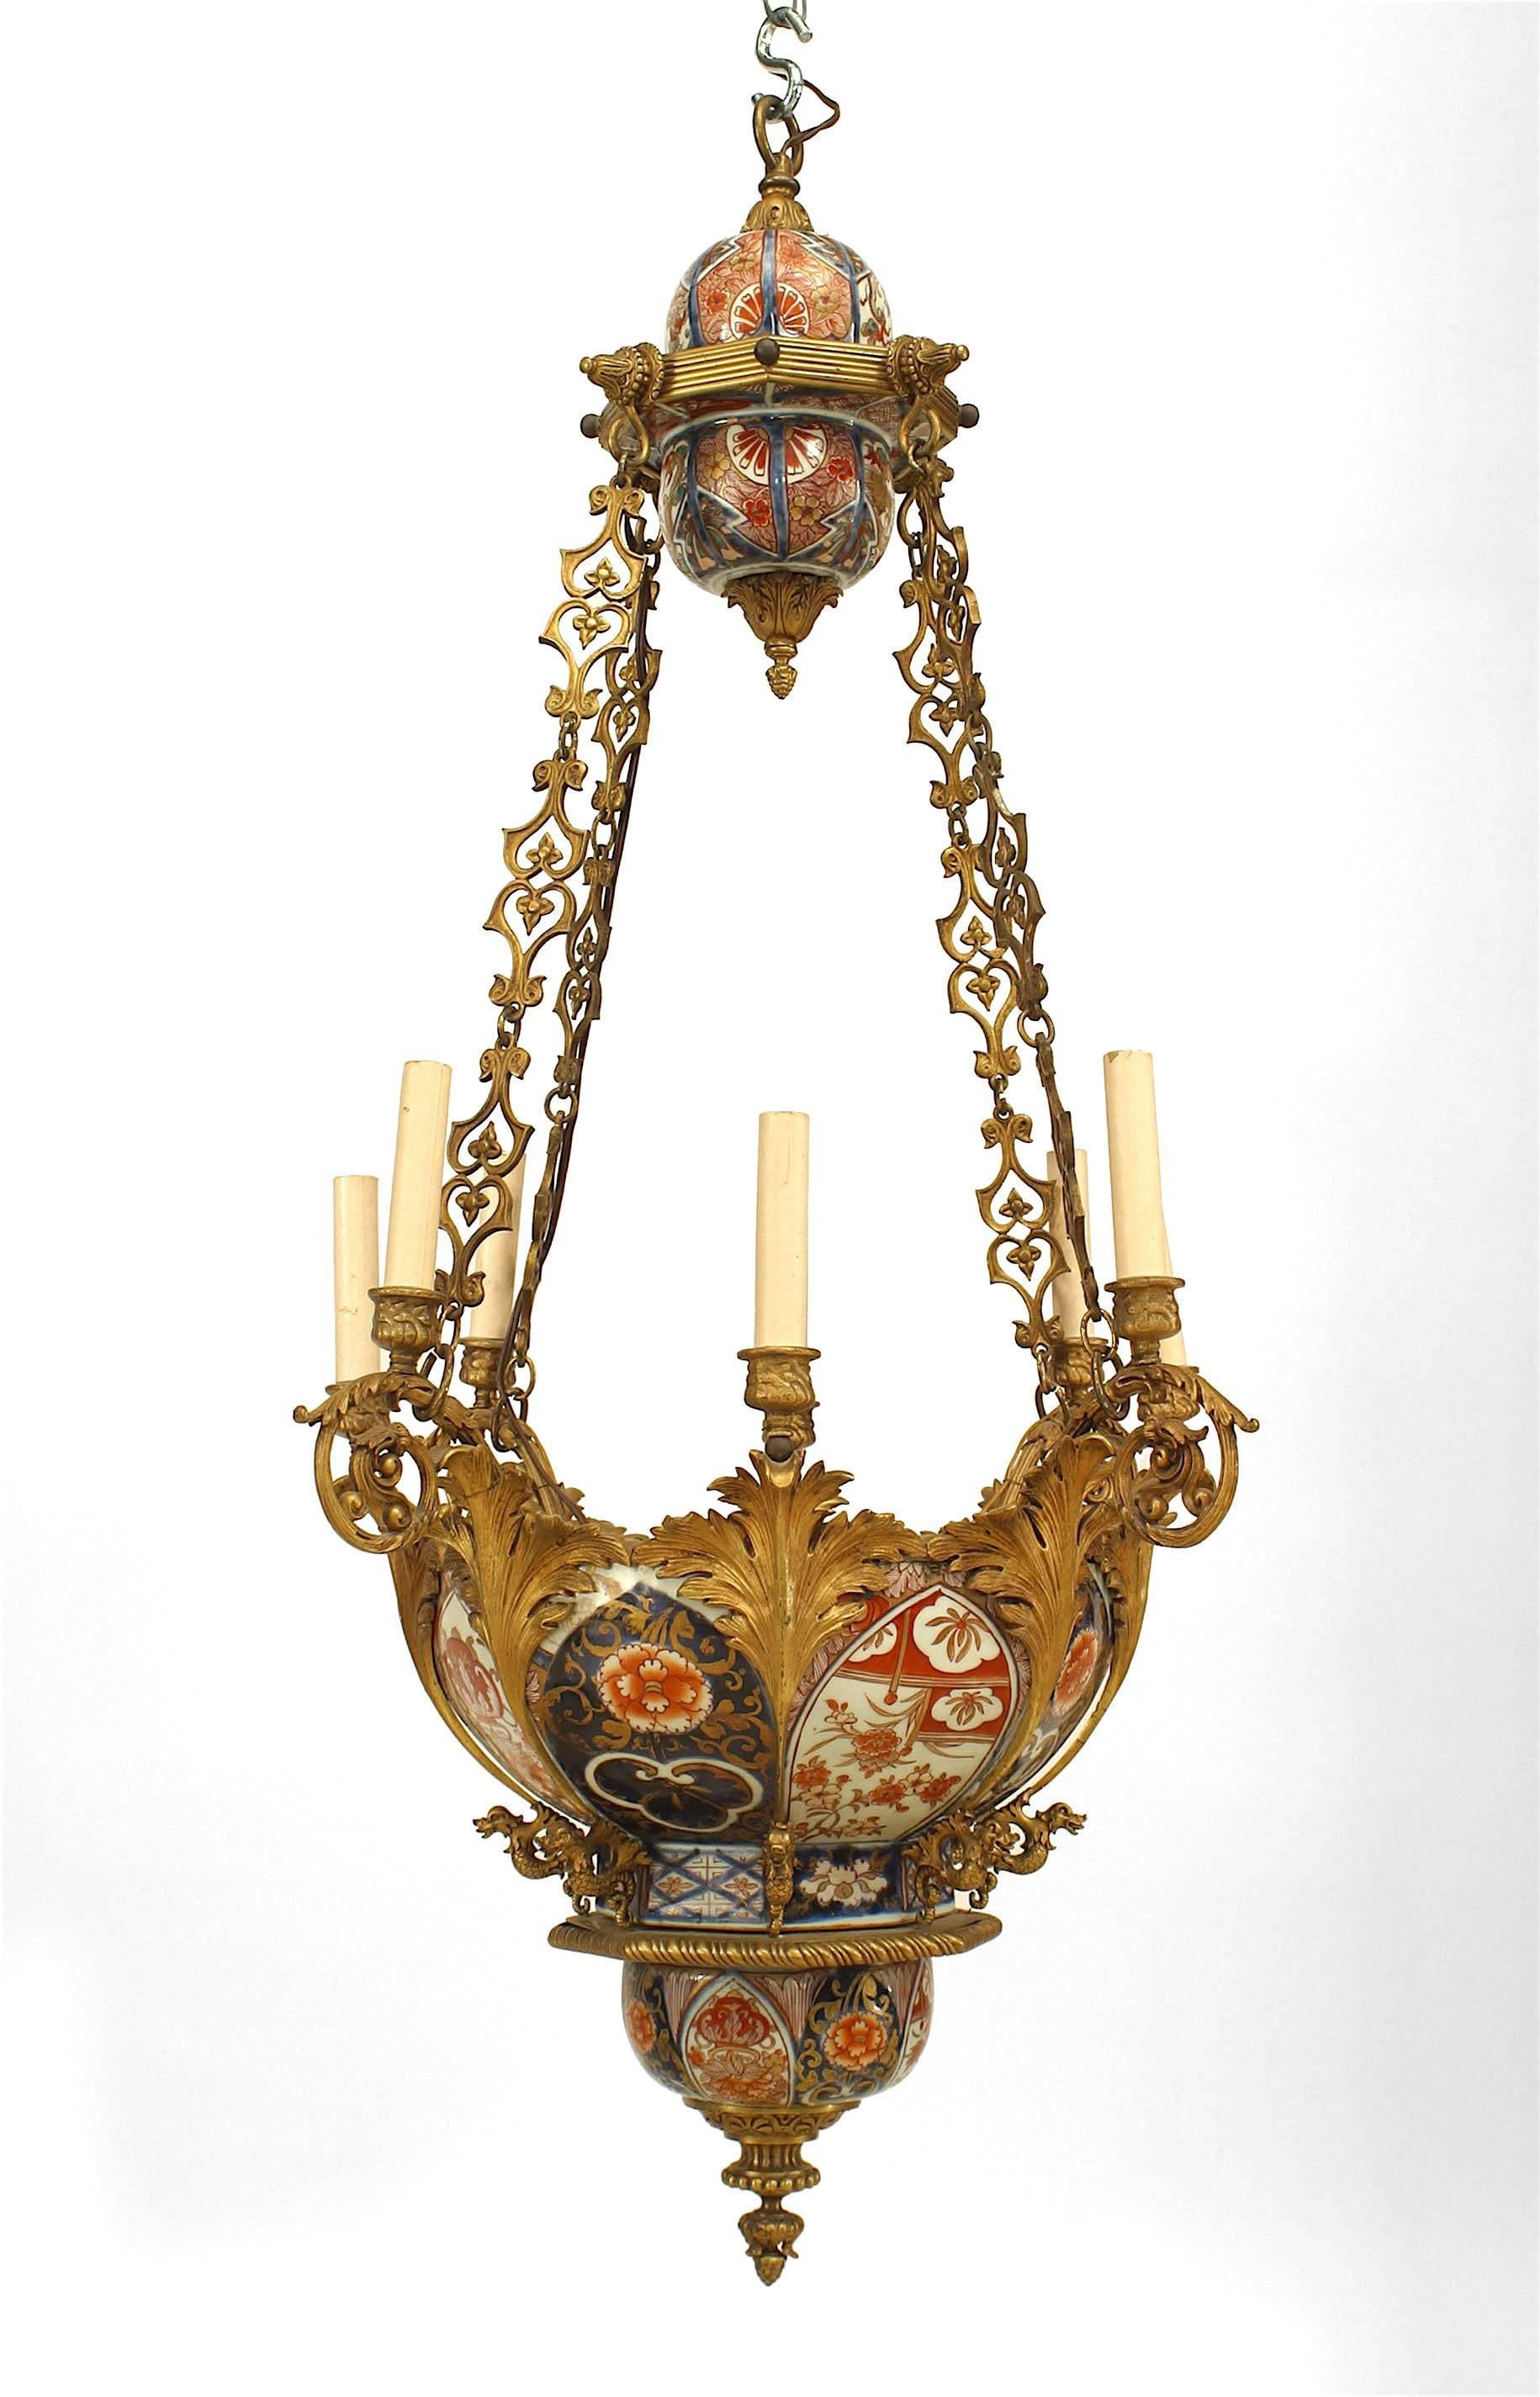 French Napoleon III (19th Century) chandelier with red, white and blue Imari porcelain bowl and top section with bronze dore 8 foliate form arms suspended on a stylized filigree chain.
 